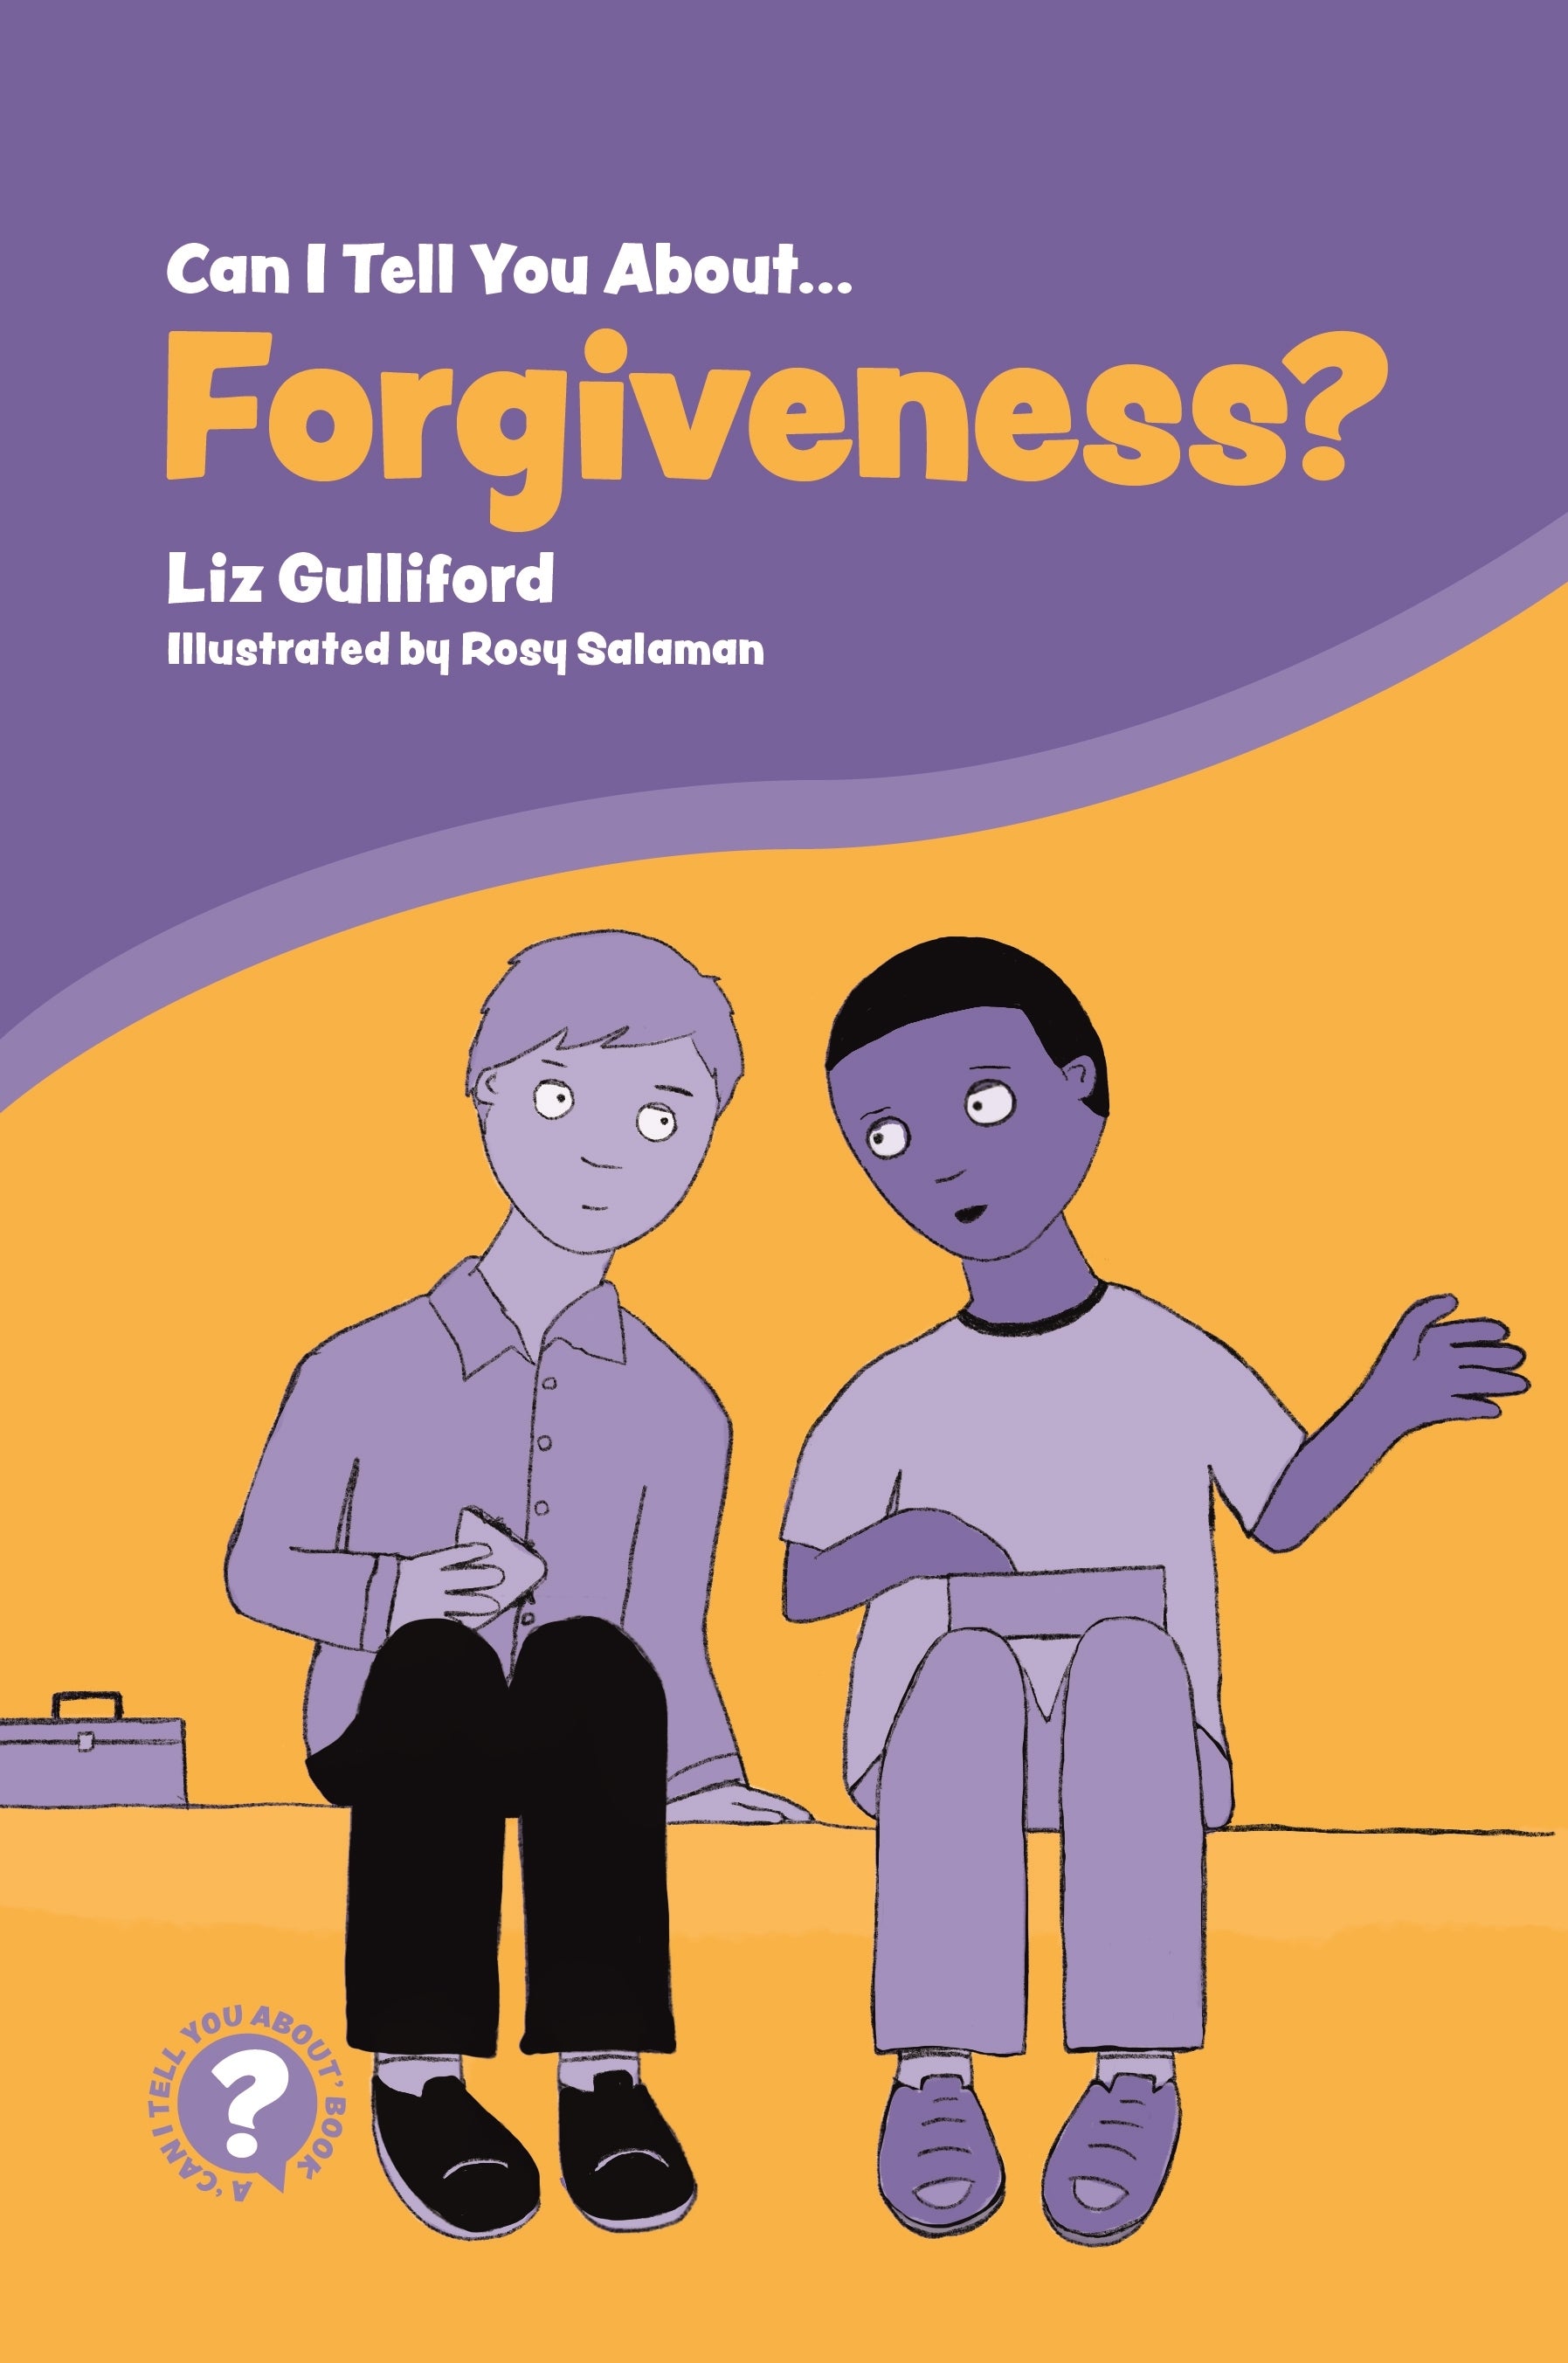 Can I Tell You About Forgiveness? by Liz Gulliford, Rosy Salaman